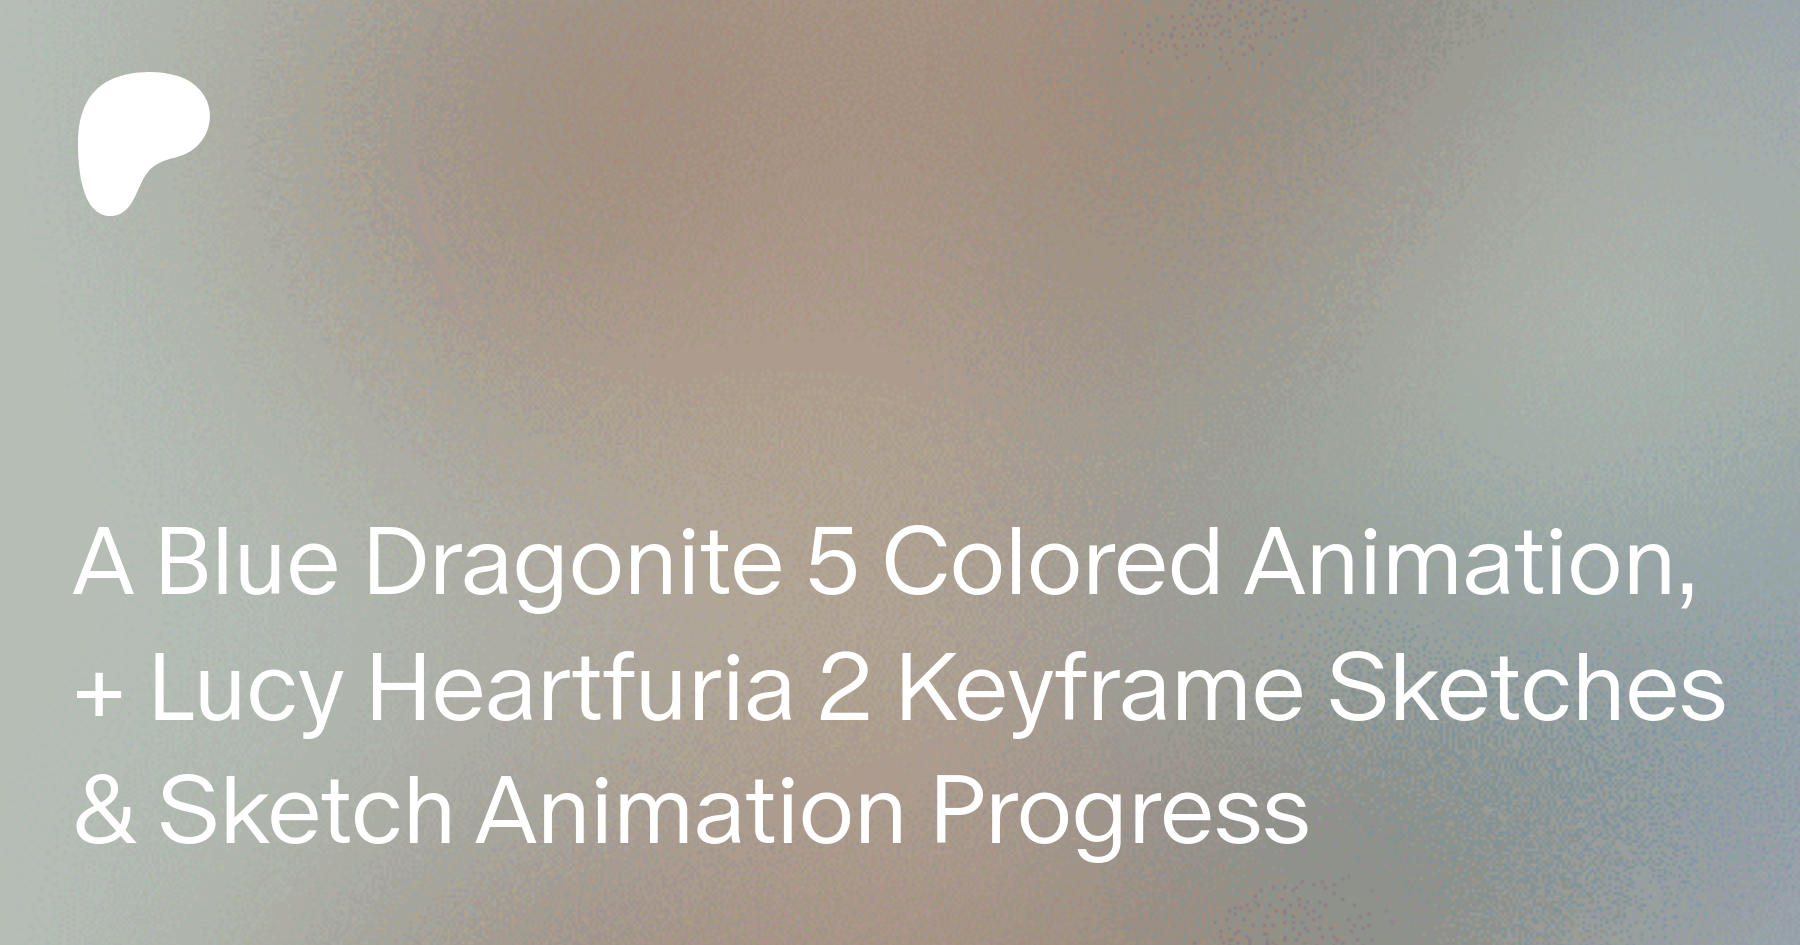 A Blue Dragonite 5 Colored Animation, + Lucy Heartfuria 2 Keyframe Sketches  & Sketch Animation Progress | Patreon